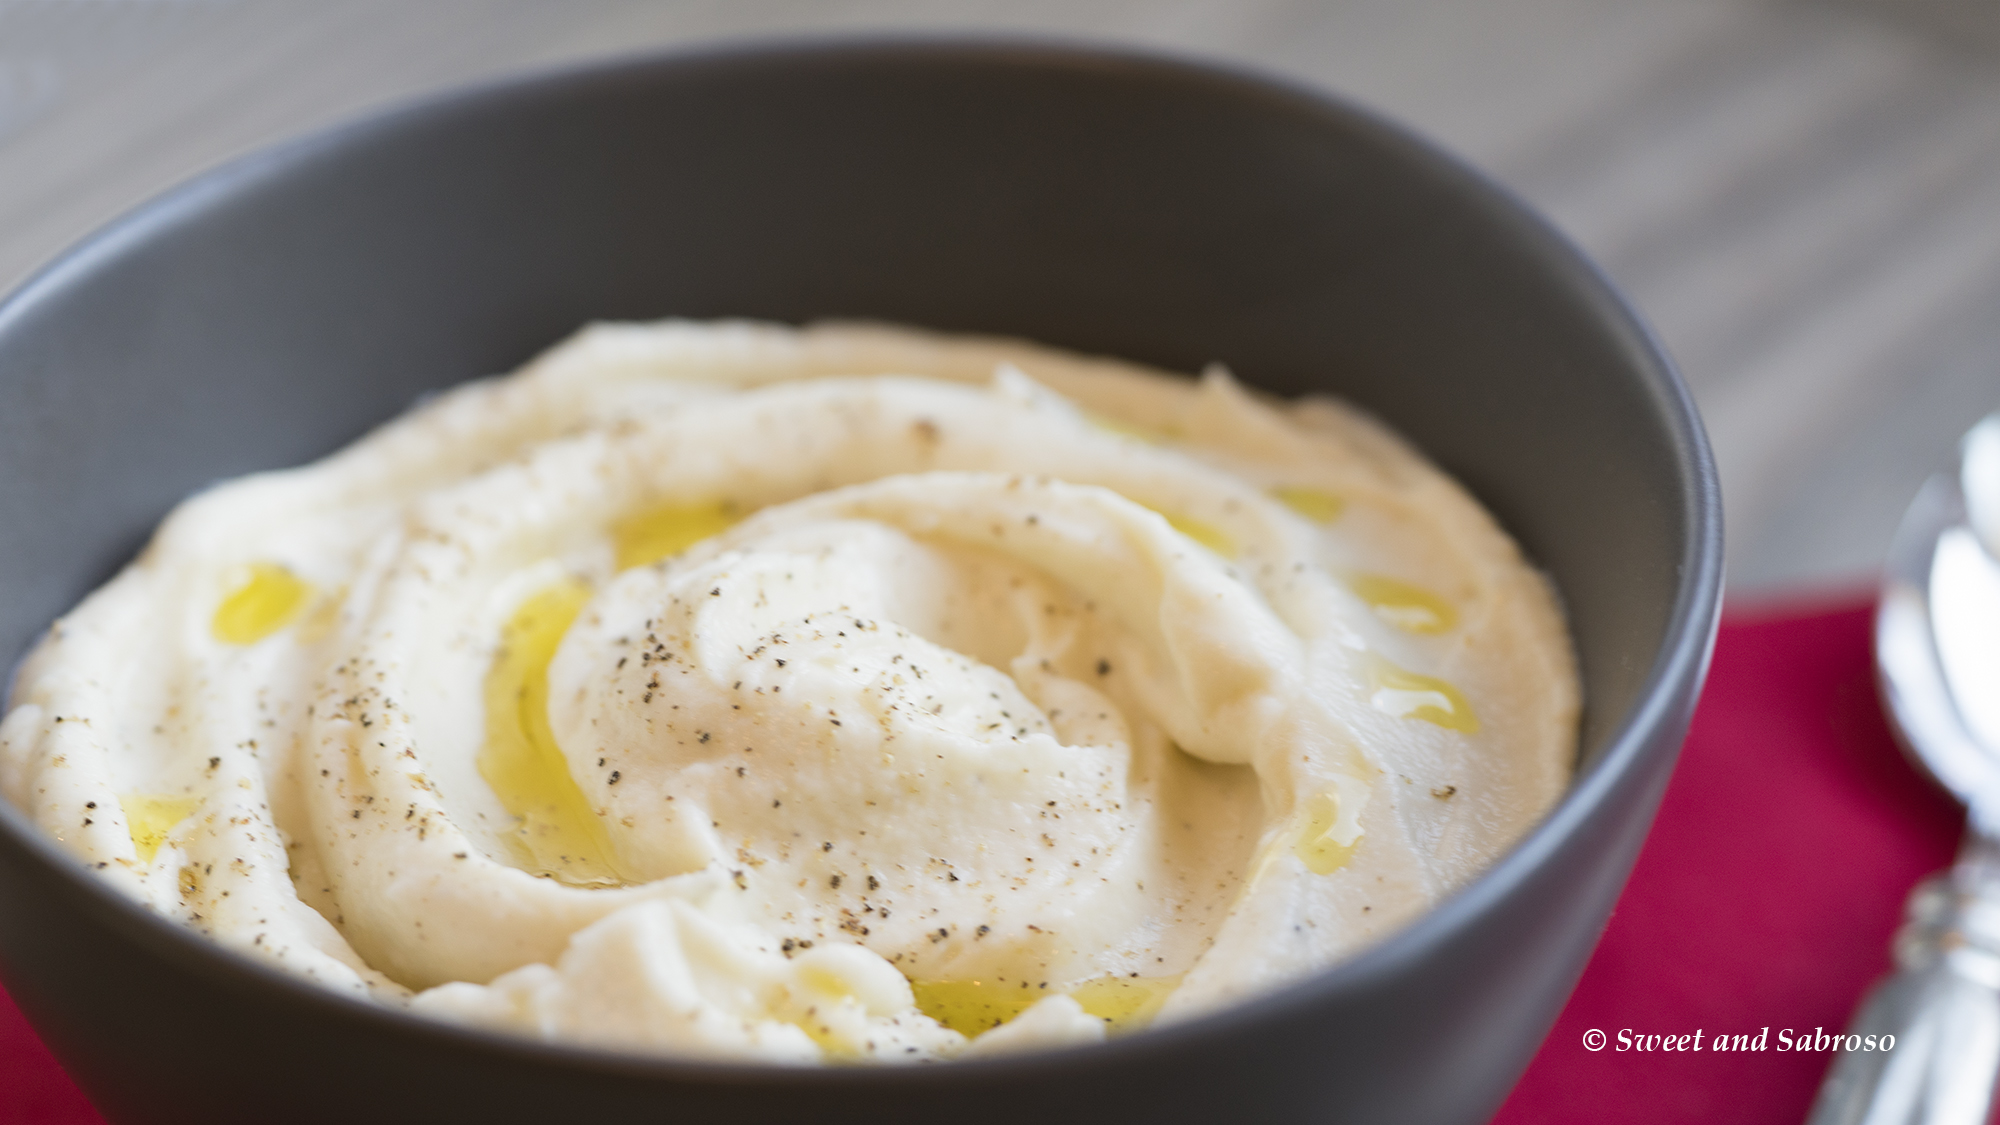 Creamy Cauliflower Purée with Manchego Cheese and Olive Oil: pictured in a pewter bowl, seasoned with black pepper and drizzled with olive oil